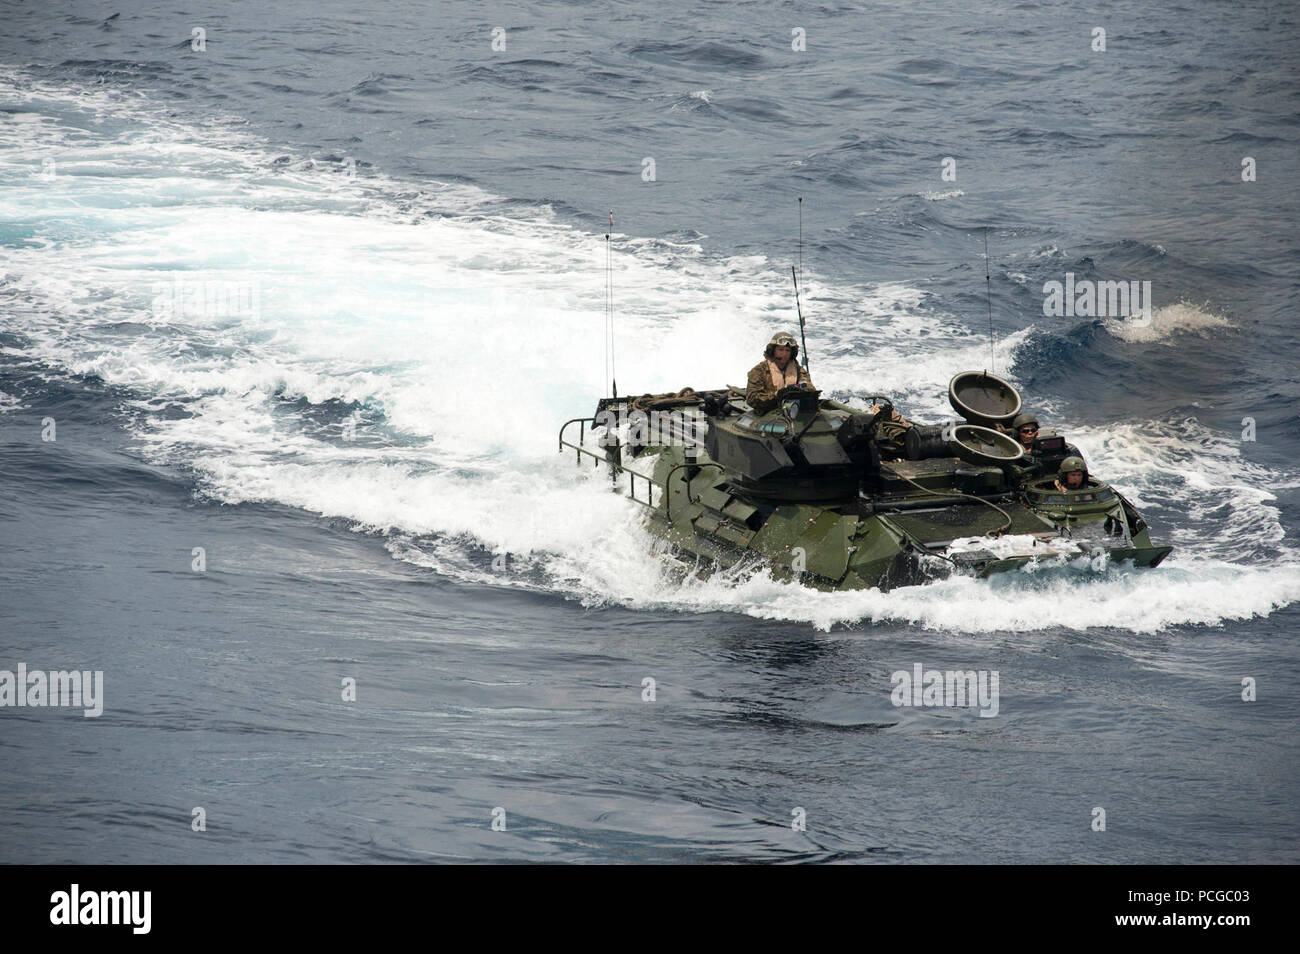 An amphibious assault vehicle, assigned to the 31st Marine Expeditionary Unit (MEU), prepares to embark the well deck of the amphibious dock landing ship USS Germantown (LSD 42) during the Amphibious Landing Exercise for PHIBLEX15. PHIBLEX15 is an annual bilateral training exercise conducted with the Armed Forces of the Philippines. Germantown is part of the Peleliu Expeditionary Strike Group, commanded by Rear Adm. Hugh Wetherald, and is conducting joint forces exercises in the U.S. 7th Fleet area of responsibility. Stock Photo